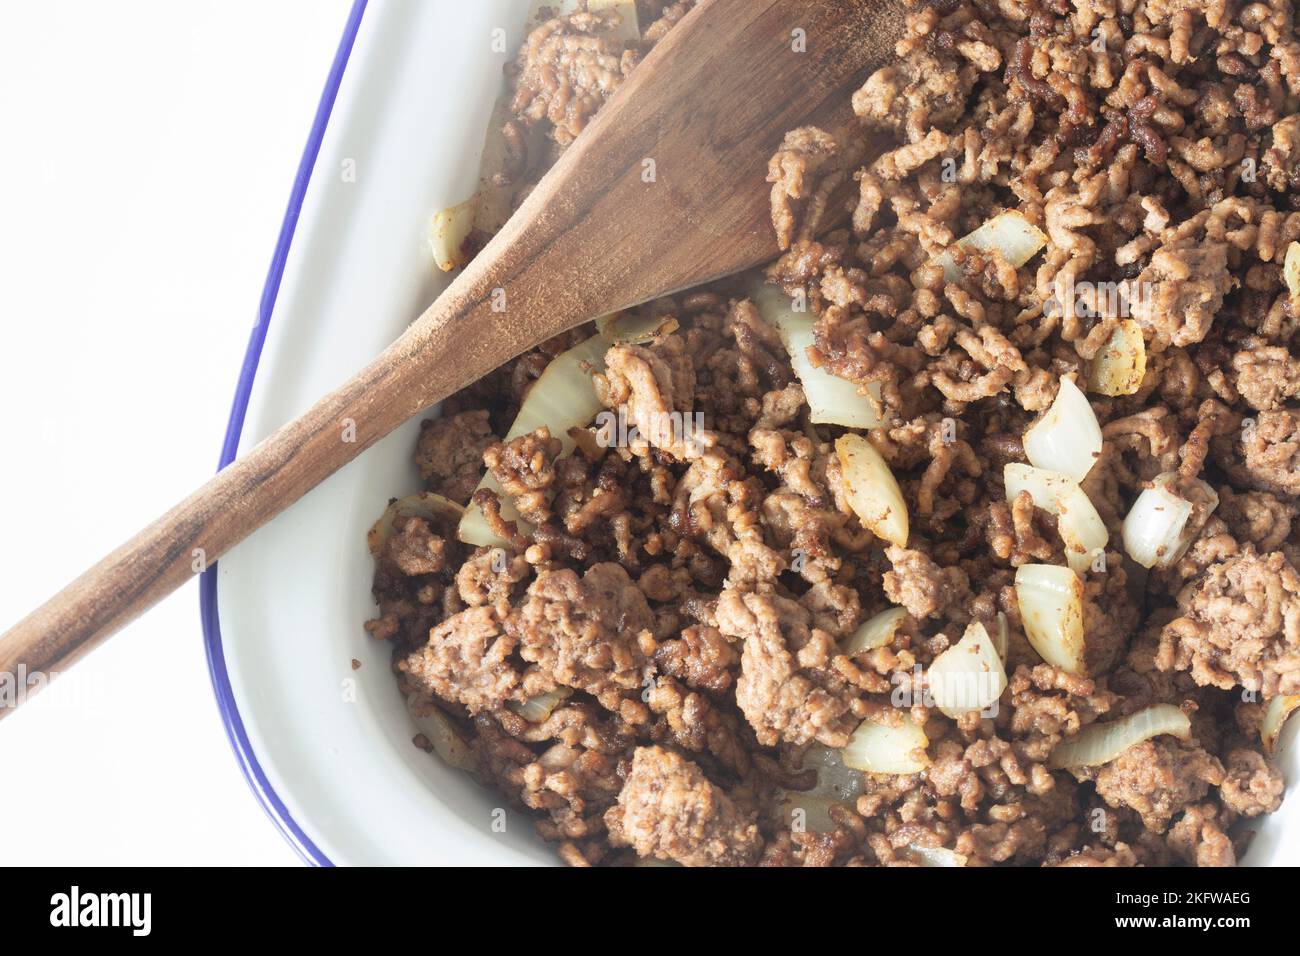 Minced beef with onion in a traditional enamel dish. Stock Photo